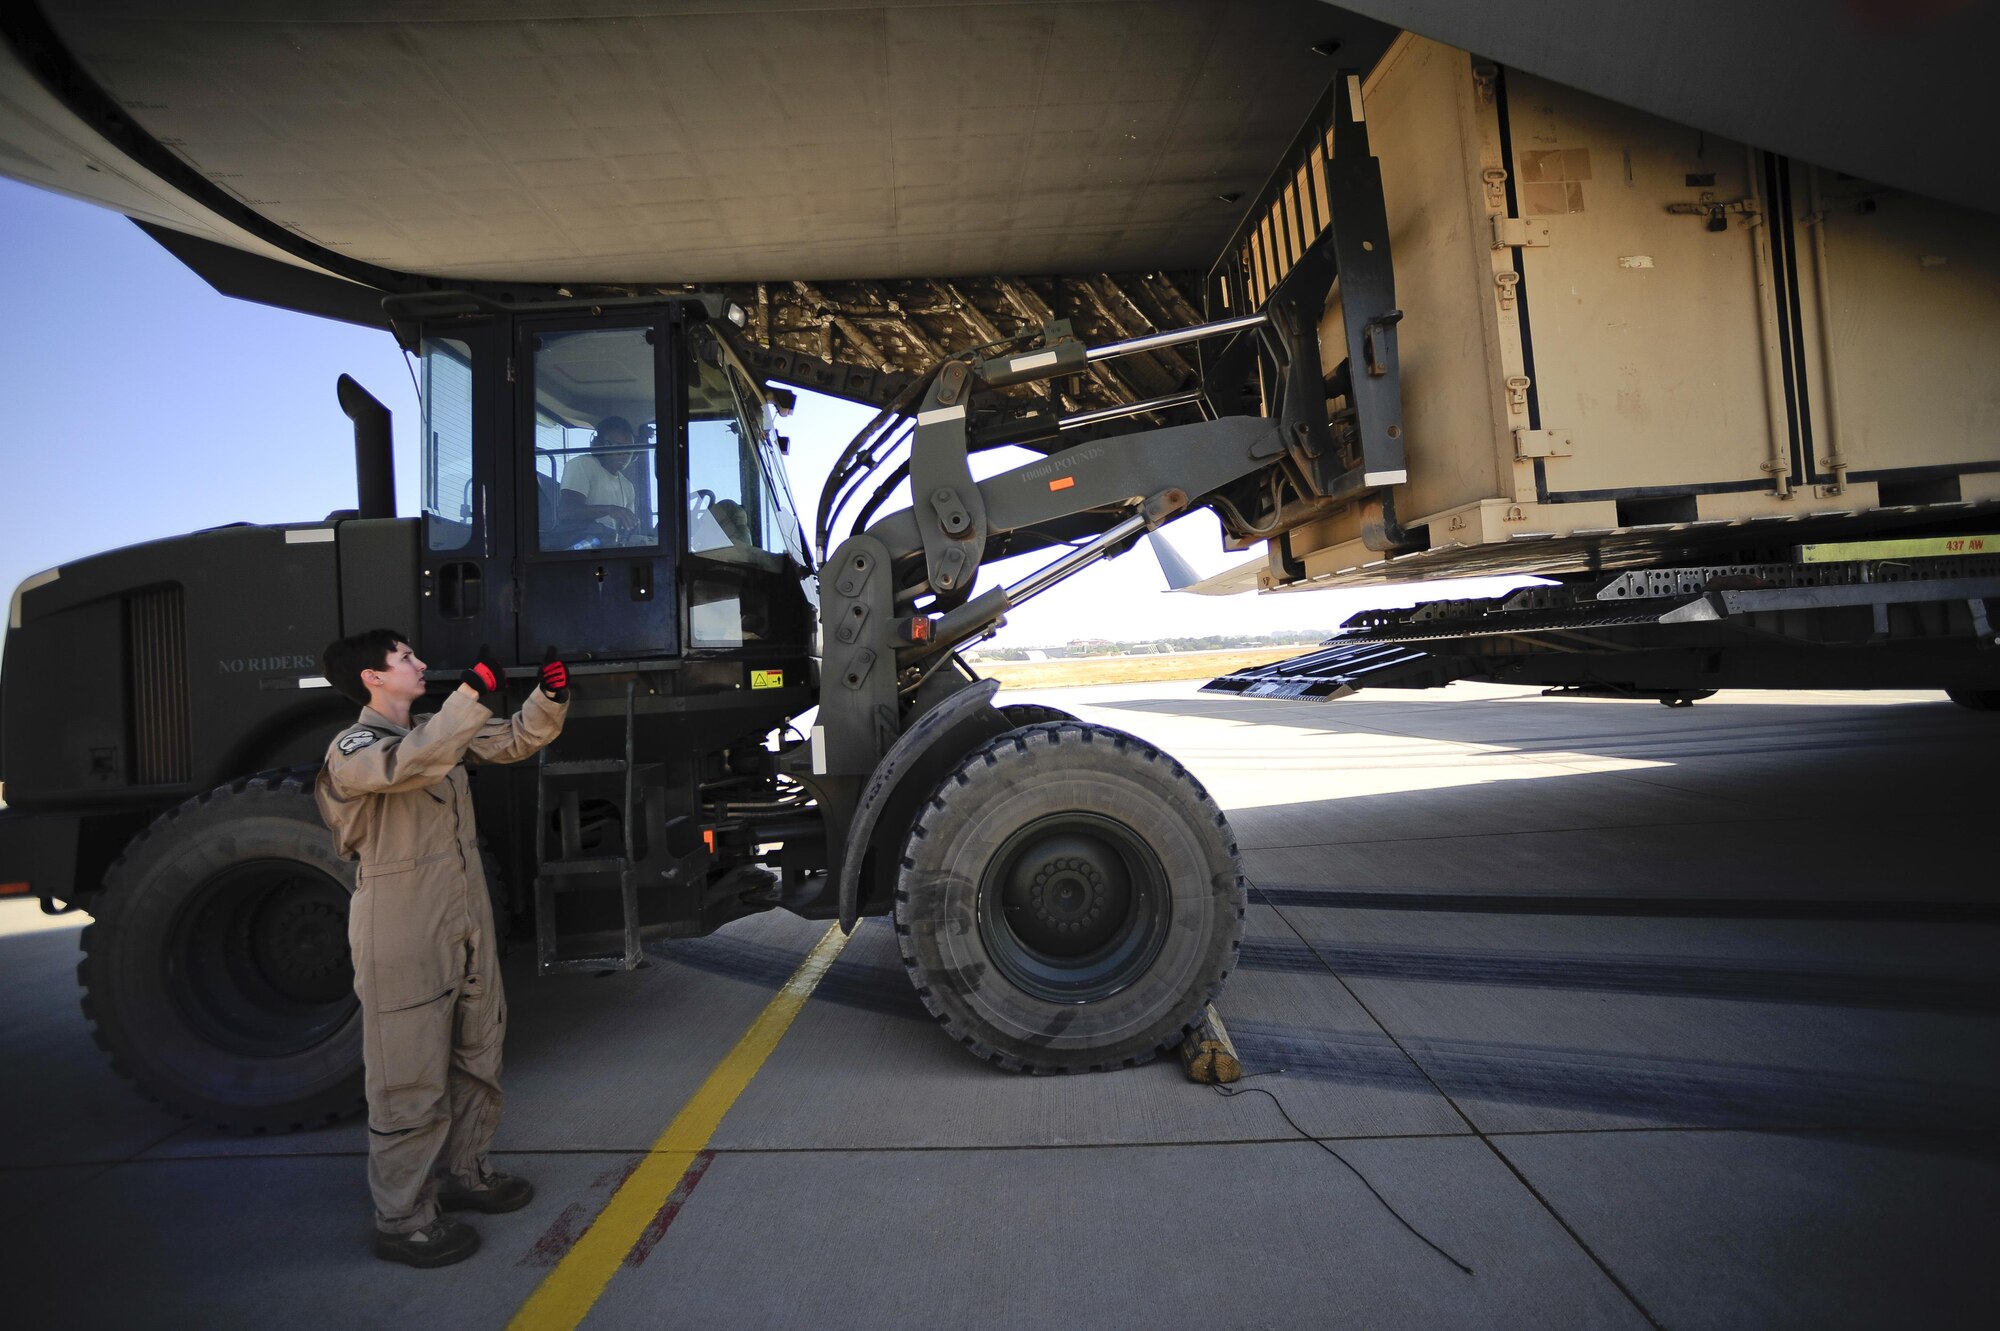 Senior Airman Ashley Igulo, a 14th Airlift Squadron loadmaster, guides Senior Airmen Greguy Bolivar, a 435th Contingency Response Squadron air transportation journeyman, Sept. 28, 2015, during a delivery of equipment for U.S. Air Forces Central Command personnel recovery mission at Diyarbakir Air Base, Turkey. The deployment of personnel recovery assets in Turkey will enable the USAFCENT with recovery of our coalition partners should they need assistance in Syria or Iraq. (U.S. Air Force photo/Airman 1st Class Cory W. Bush)